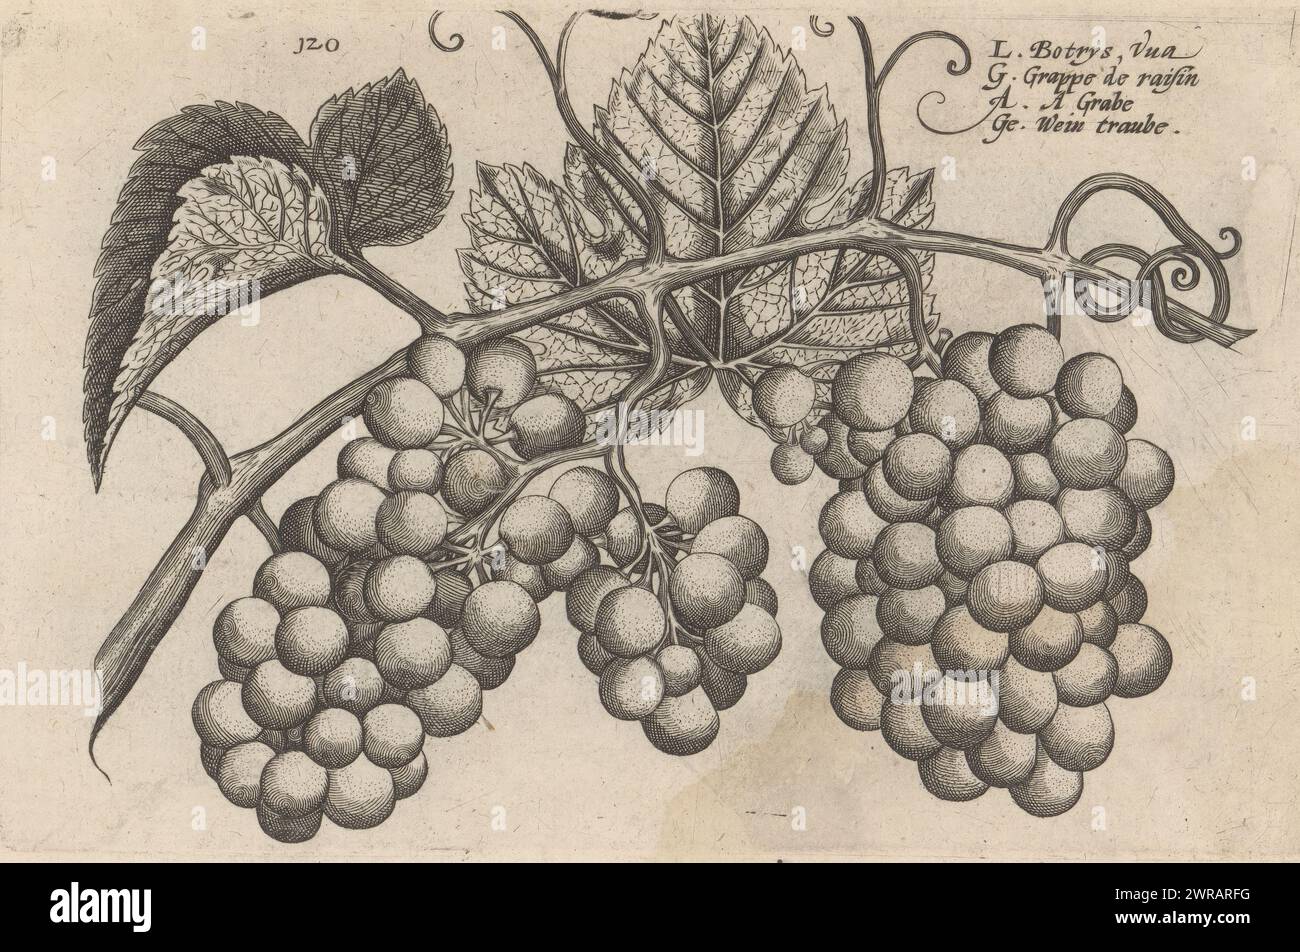 Vine with grapes, Botrys, vua / Grappe de raisin / A grabe / Wein Traube (title on object), Flower garden, the other part (series title), Altera pars horti floridi (series title), Flower garden (series title), Hortus floridus (series title), The image is numbered: 120. Print is part of a book., print maker: Crispijn van de Passe (II), (attributed to), after design by: Crispijn van de Passe (I), (attributed to), publisher: Johannes Janssonius, Arnhem, 1617, paper, engraving, height 129 mm × width 206 mm, print Stock Photo